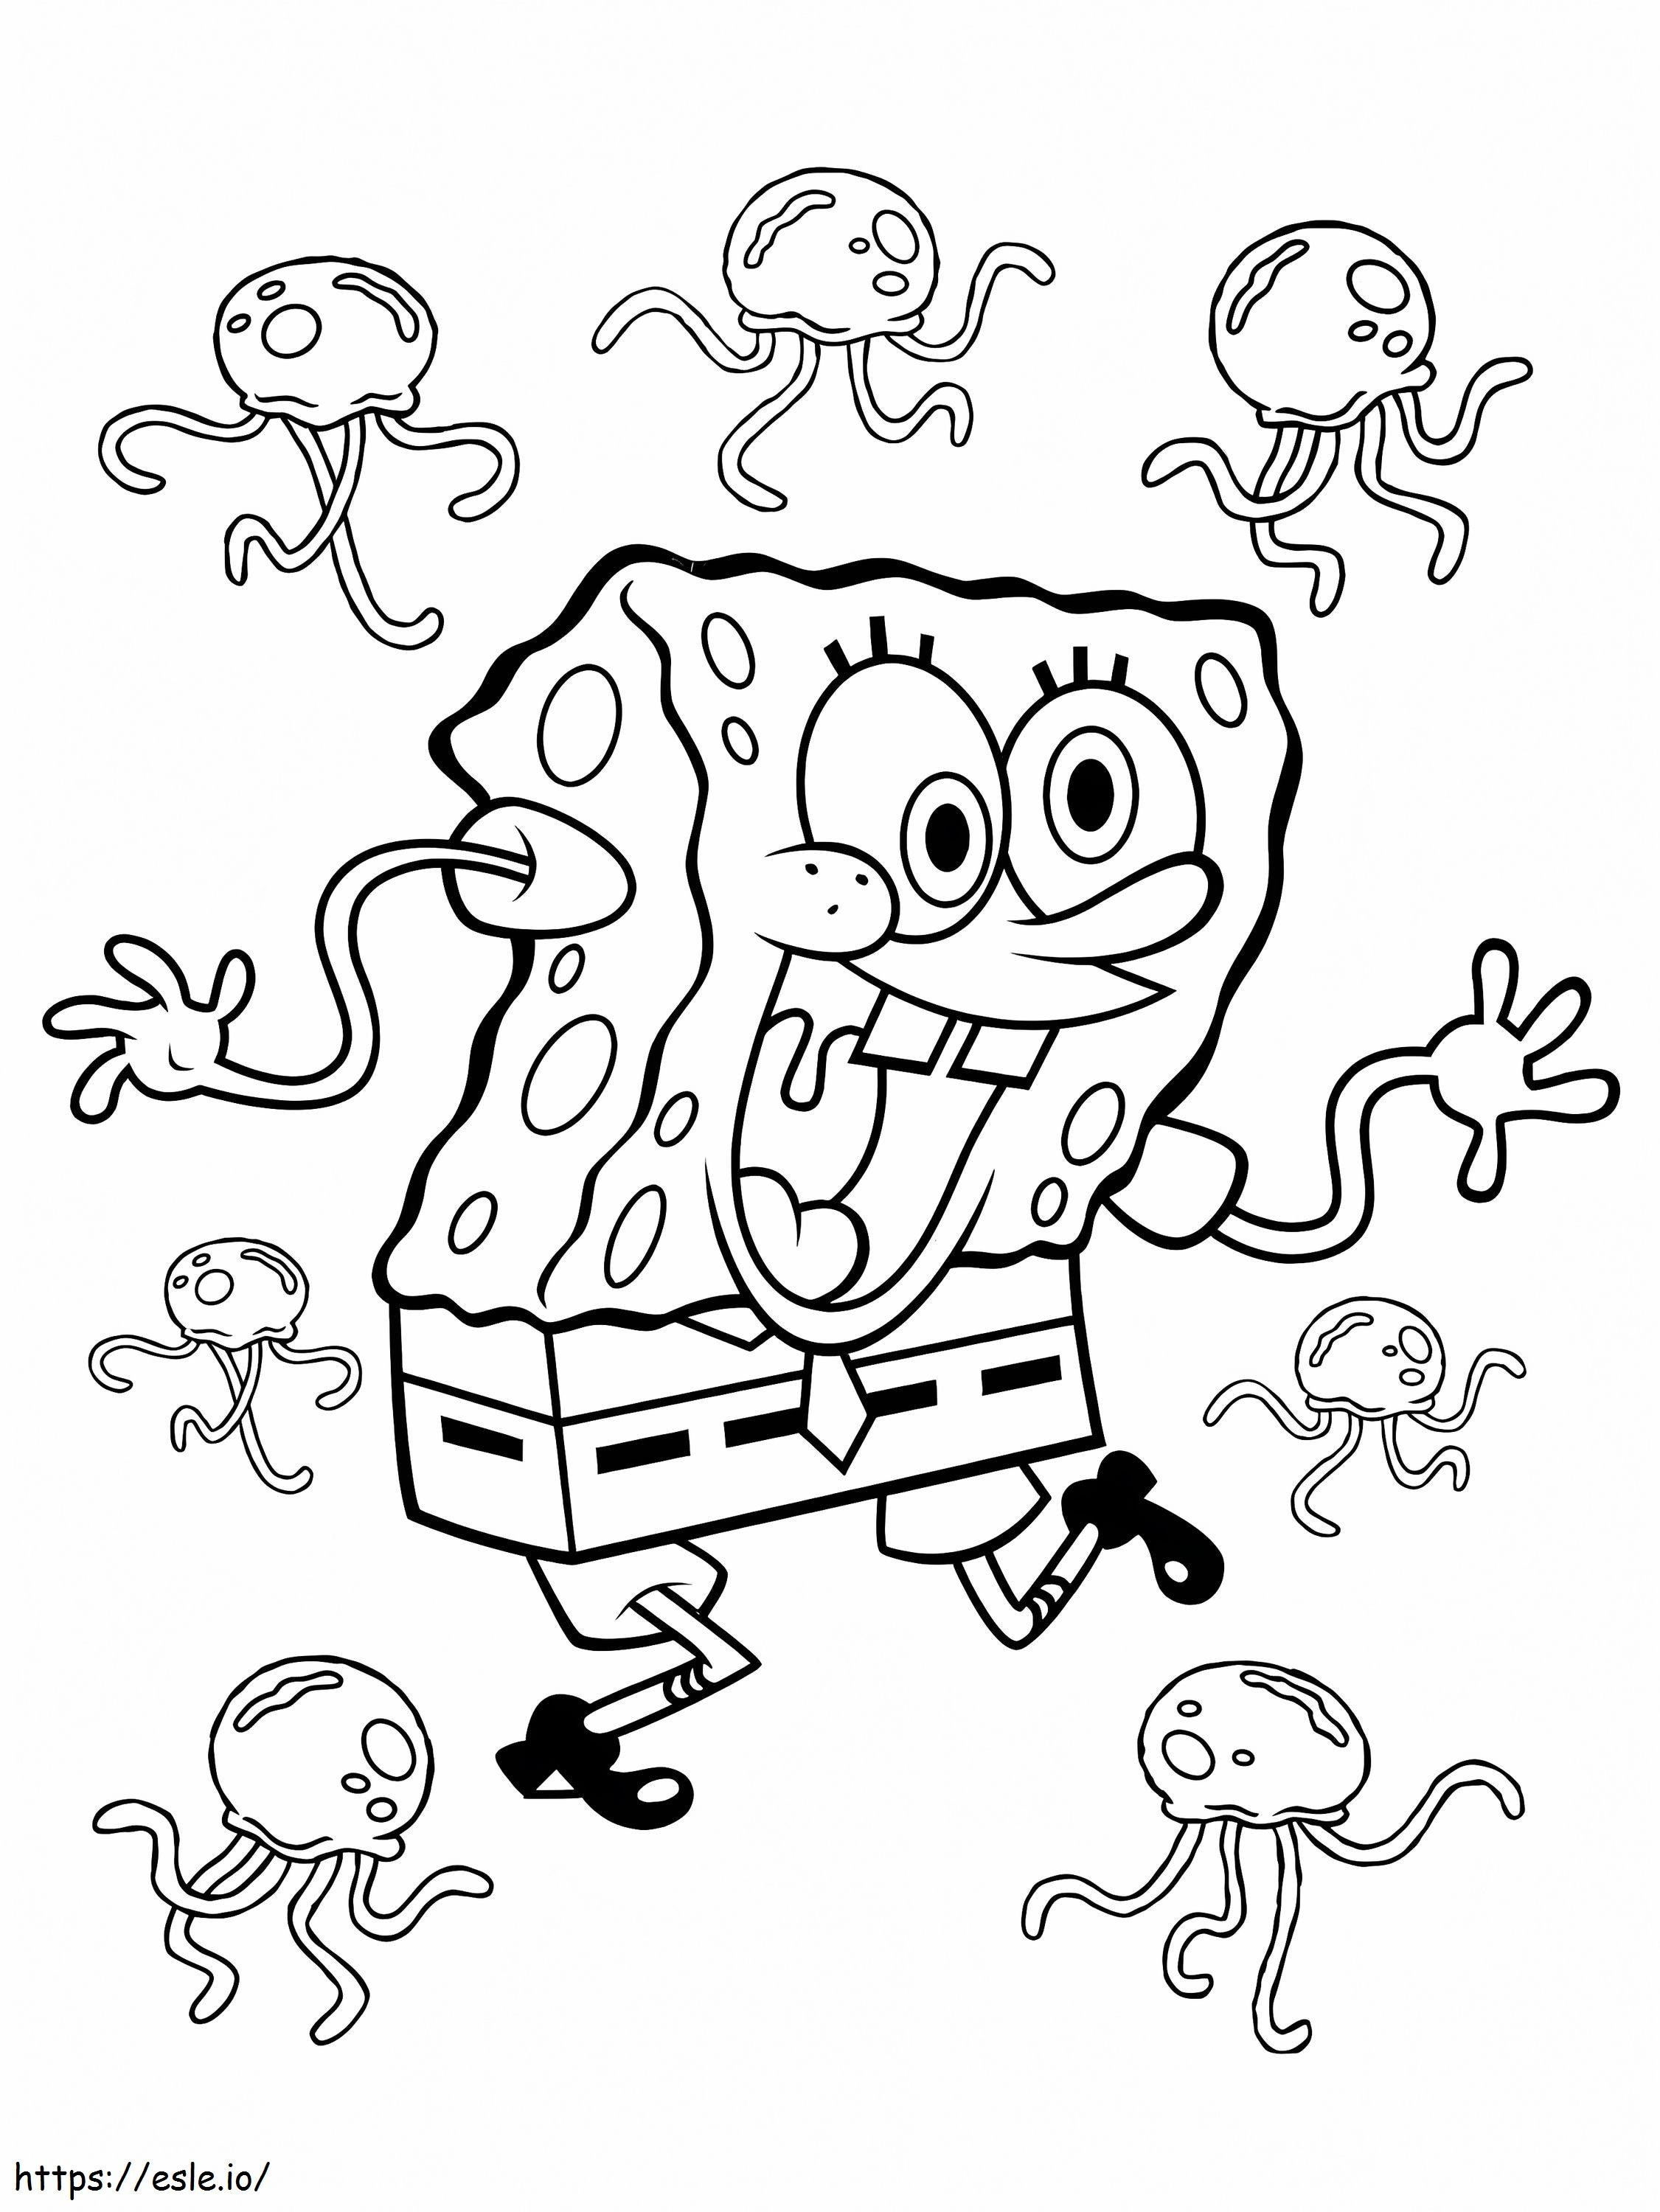 SpongeBob And Jellyfish coloring page